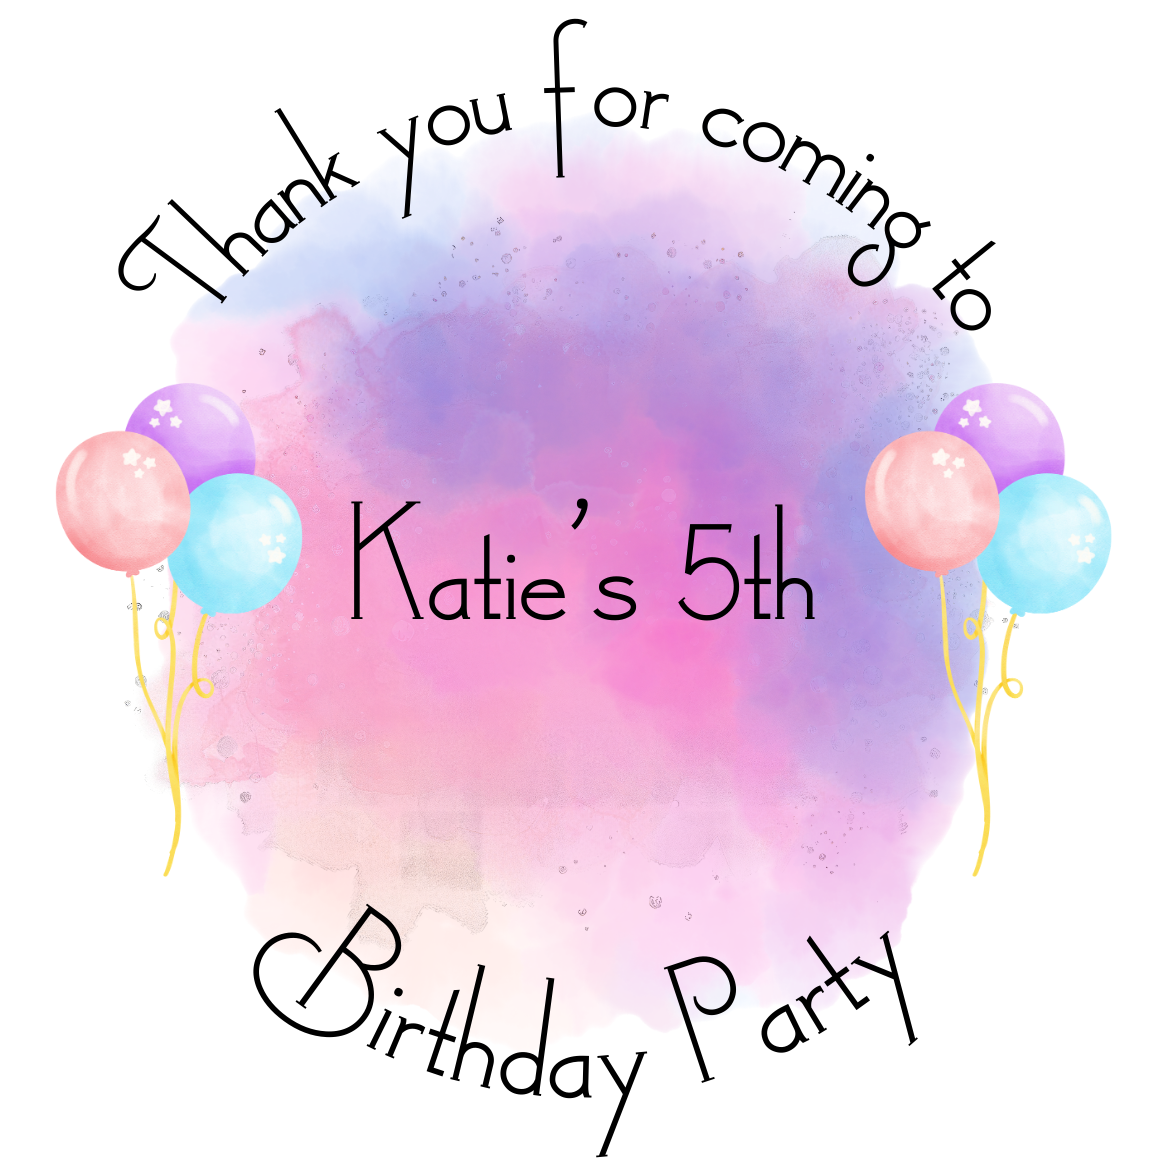 Thank you for coming to my party stickers, Paint splash stickers, Goodie bag stickers, thank you stickers, three sizes, name stickers